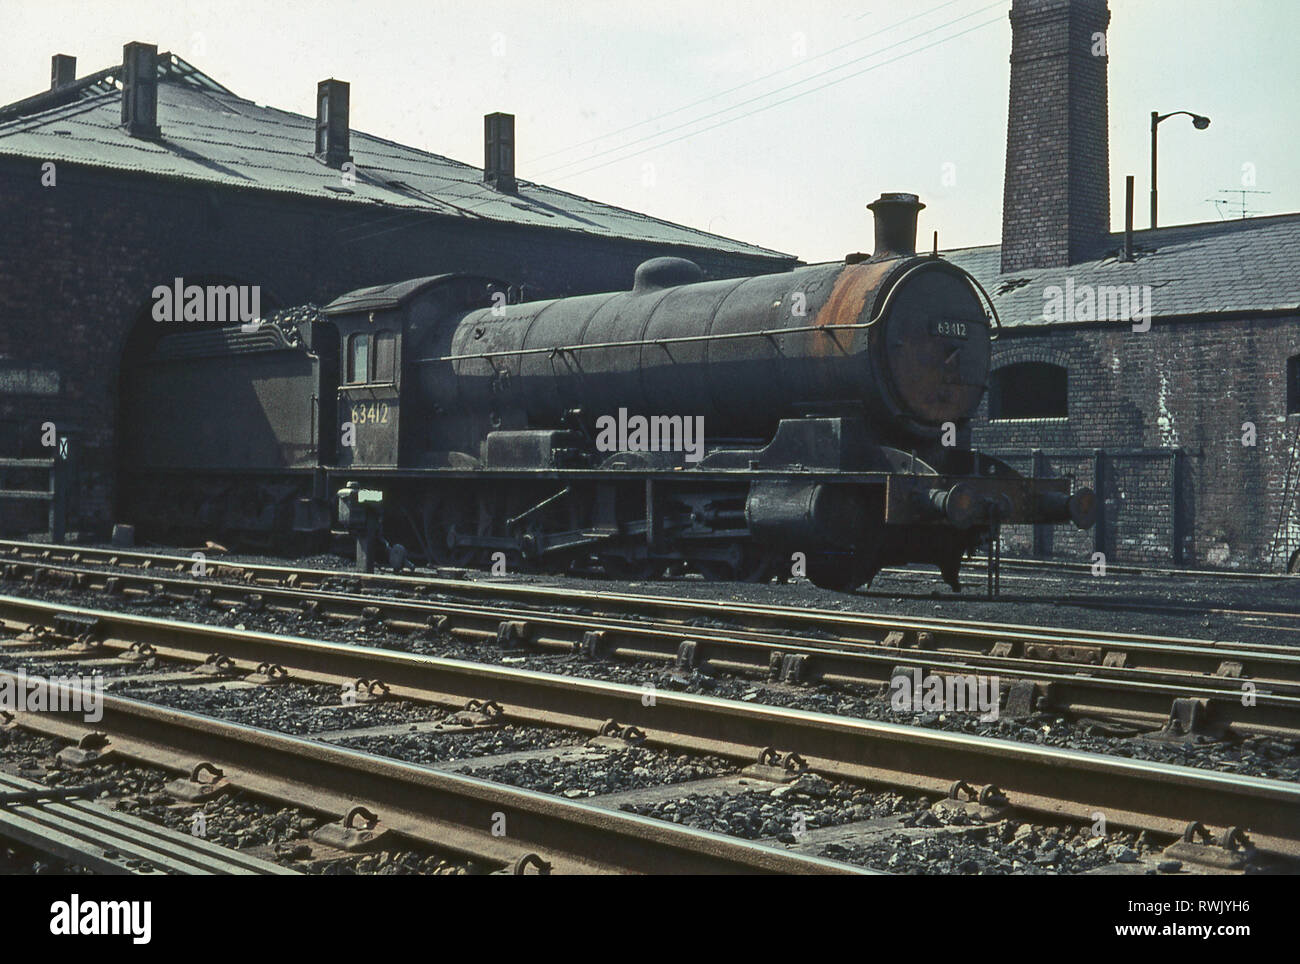 Q6 No 63412 at Sunderland shed, Sunderland, England possible mid sixties Stock Photo